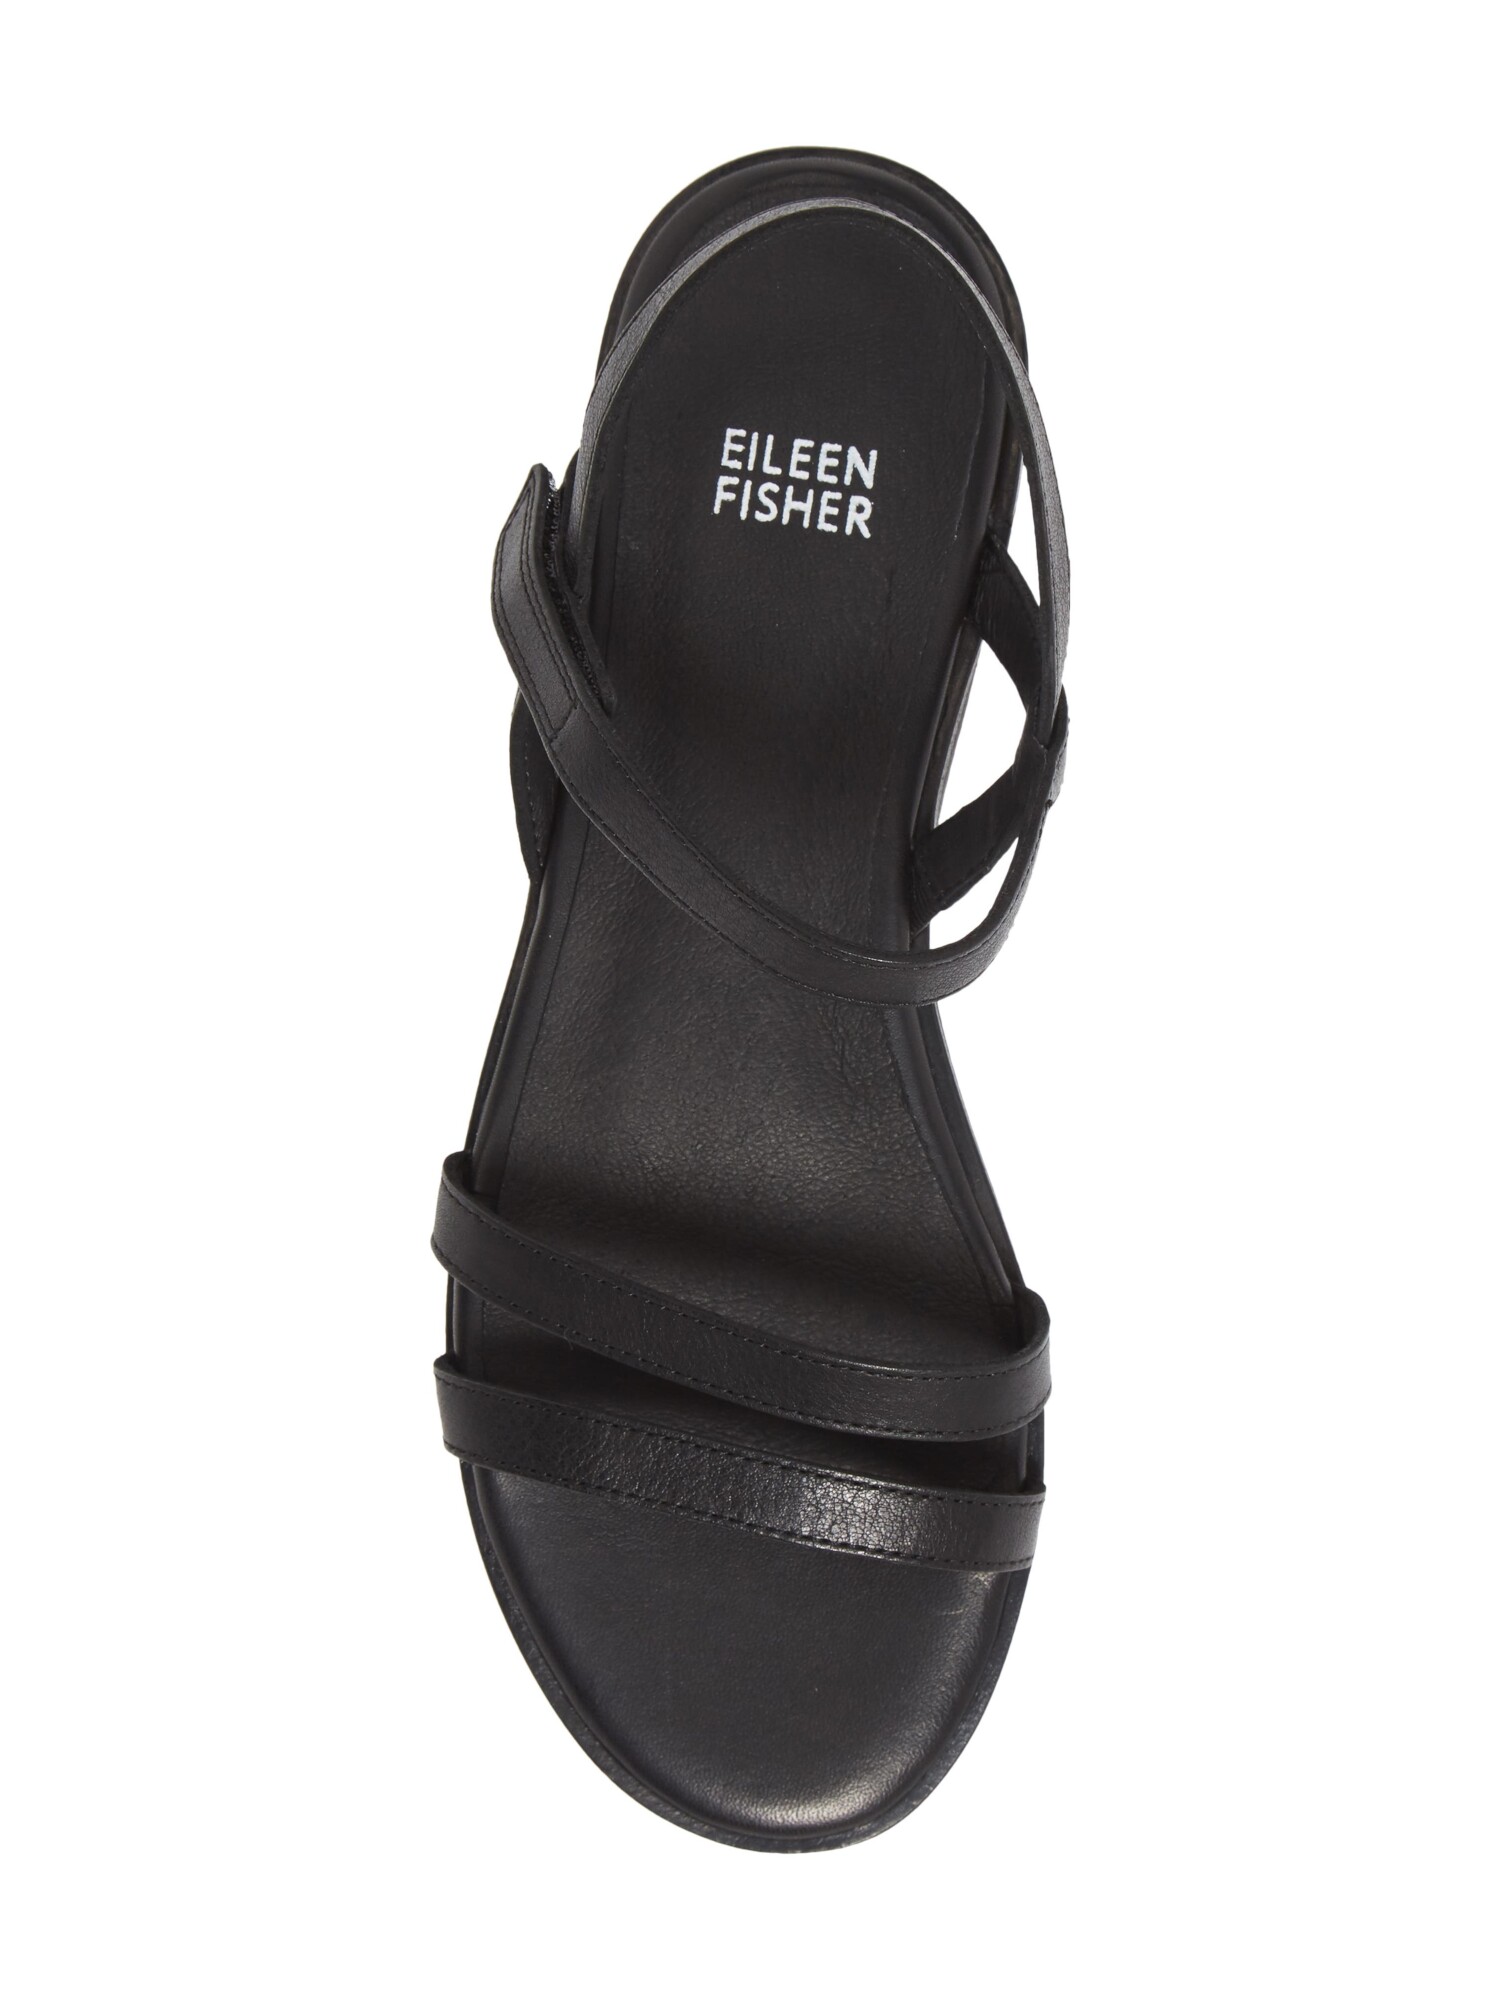 EILEEN FISHER Womens Black Padded Strappy Adjustable Strap Cahill Leather Sandals 10